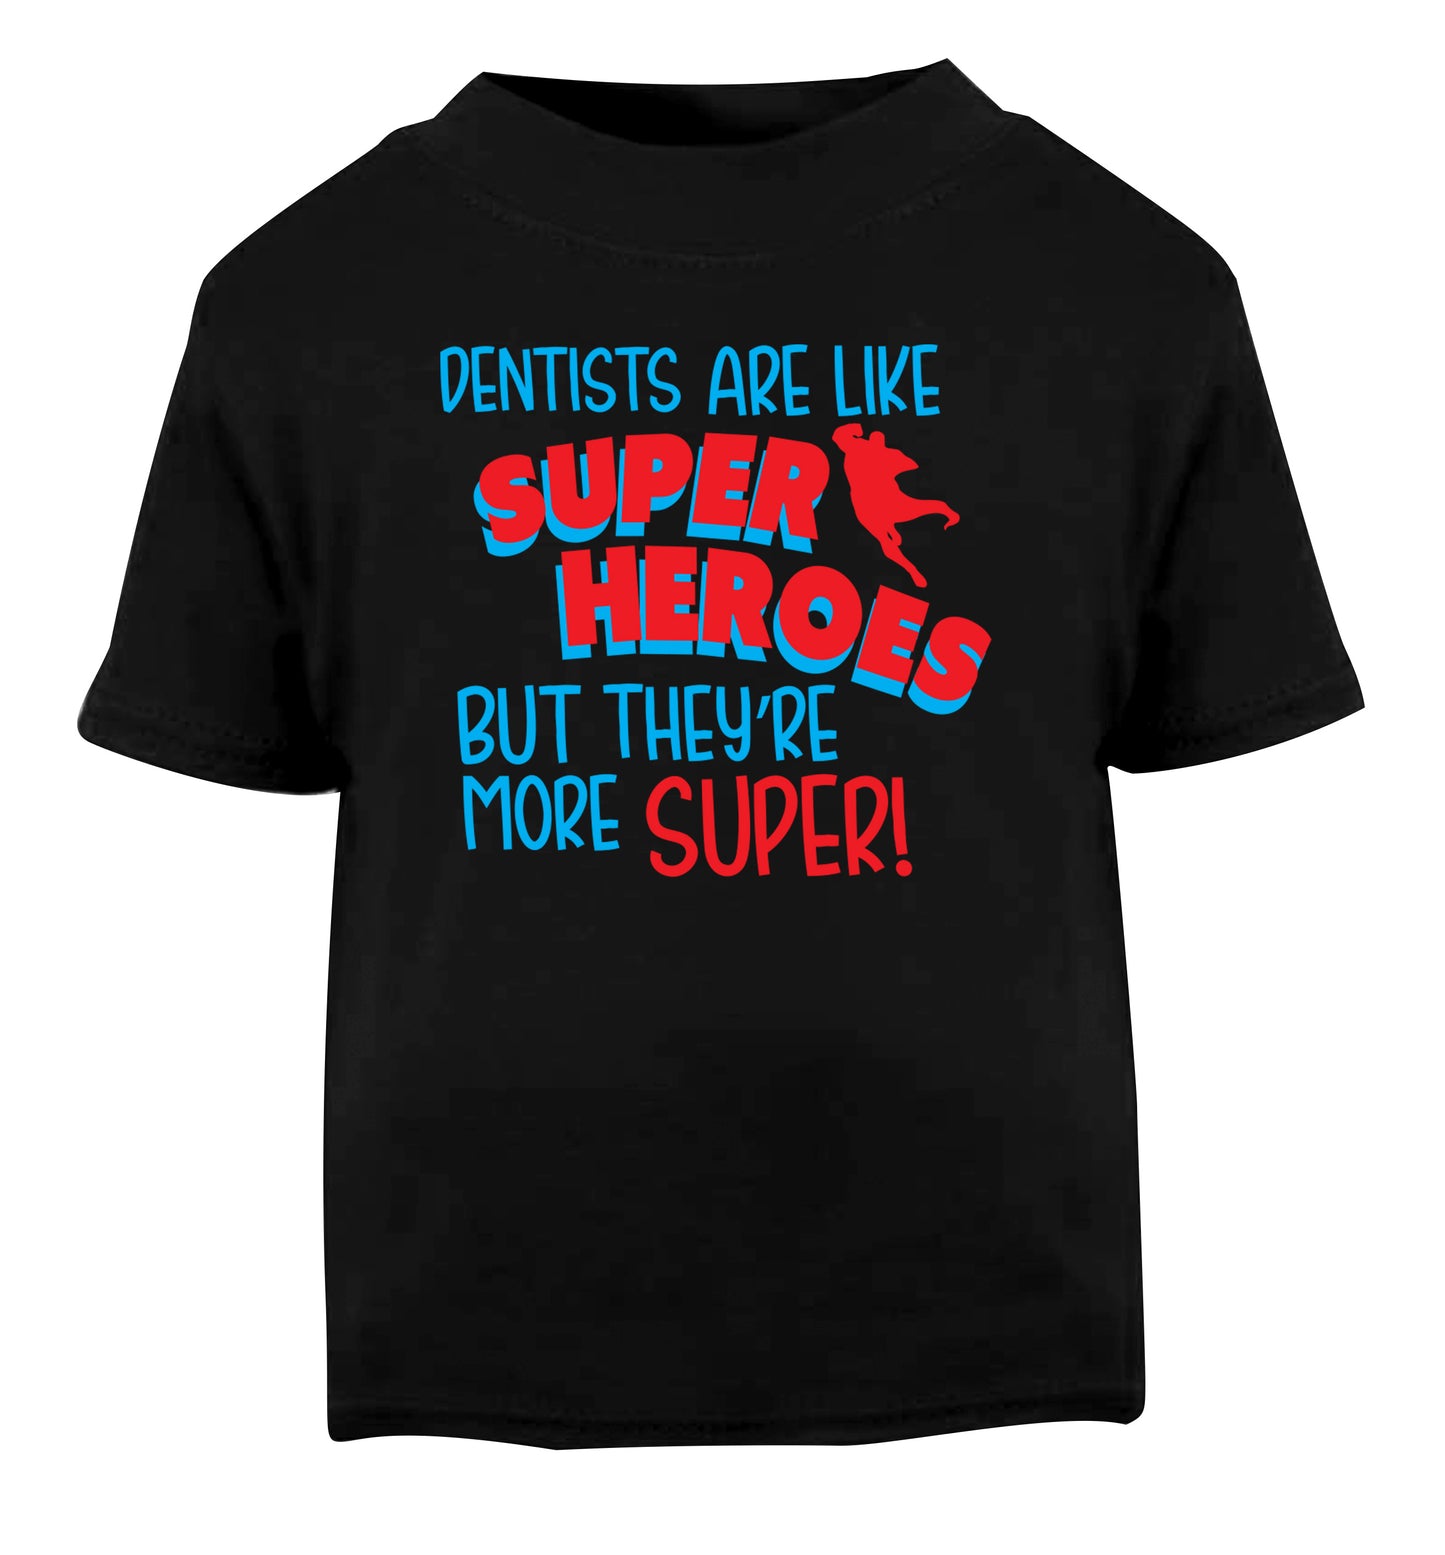 Dentists are like superheros but they're more super Black Baby Toddler Tshirt 2 years